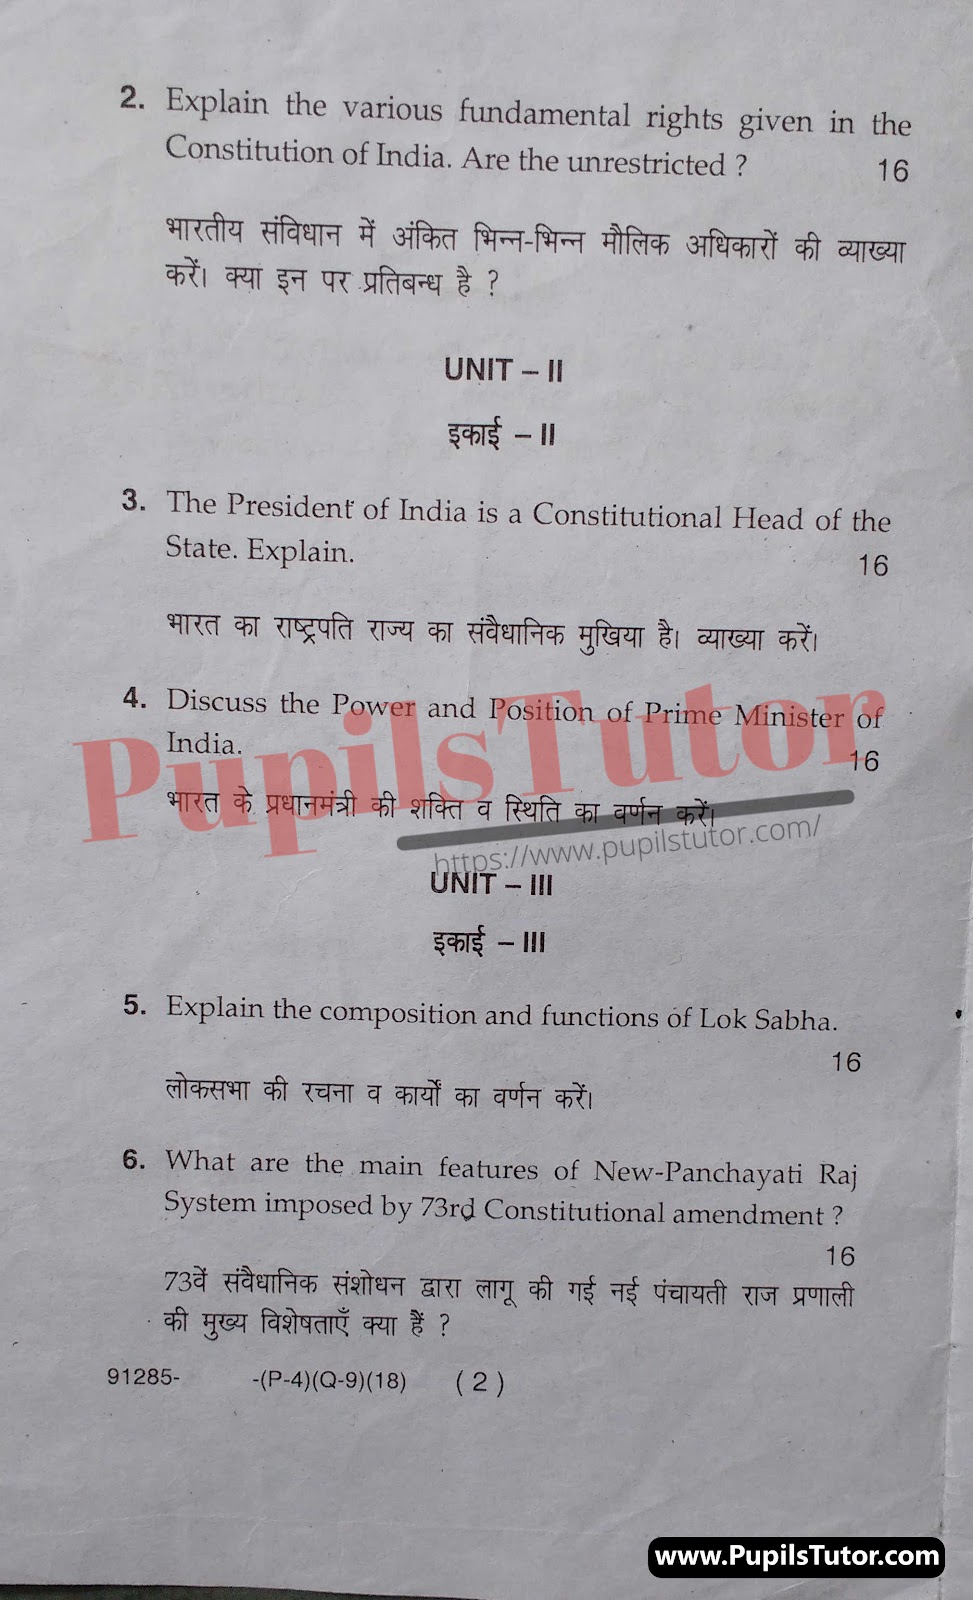 M.D. University B.A. Political Science (Indian Constitution) First Semester Important Question Answer And Solution - www.pupilstutor.com (Paper Page Number 2)